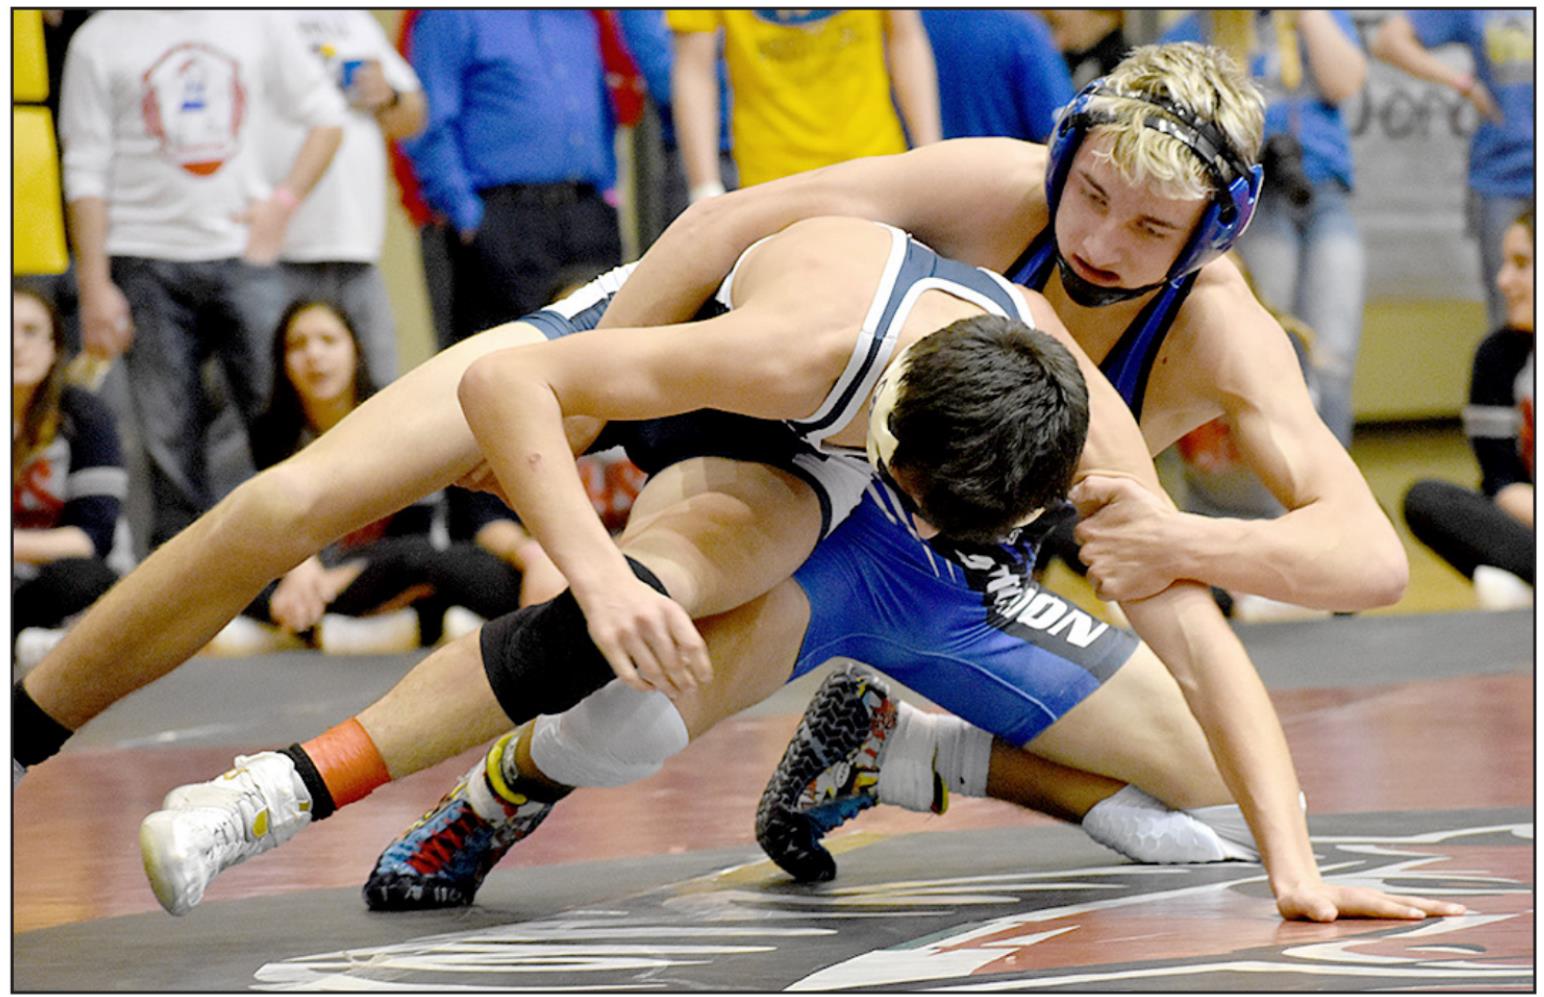 JUSTIN KNOLL makes a move on Adam Reed of Minneapolis during state wrestling action at Gross Memorial Coliseum in Hays on Friday. (Photo courtesy of Bobbi Basart)